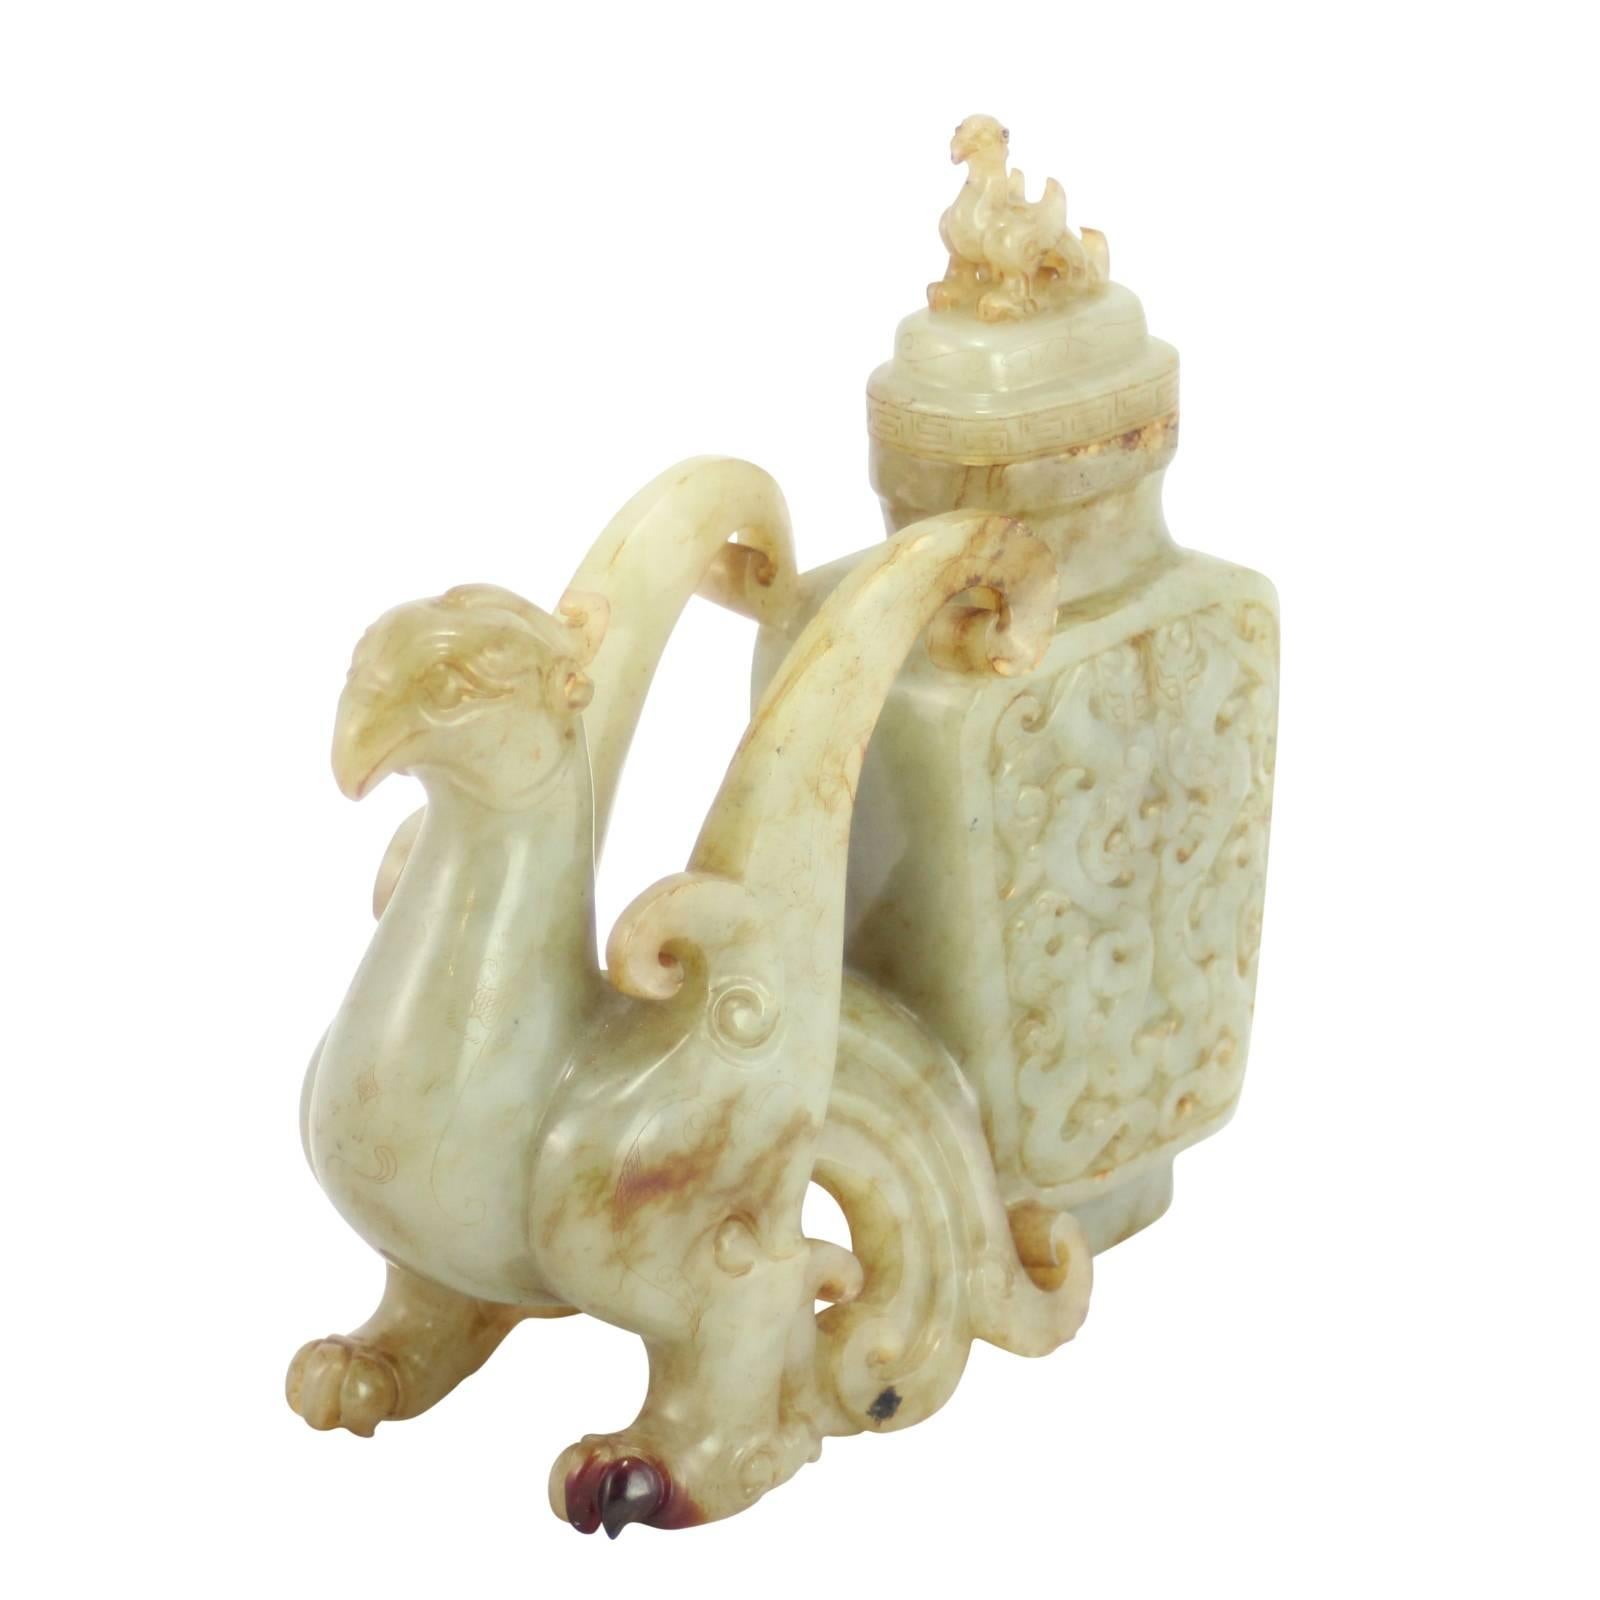 A finely carved, lidded jade vase with a figure of a Phoenix. The vase features elaborate carving and a removable lid with a finial of a Phoenix. The whole piece is crafted from pale celadon green nephrite jade with russet color inclusions.